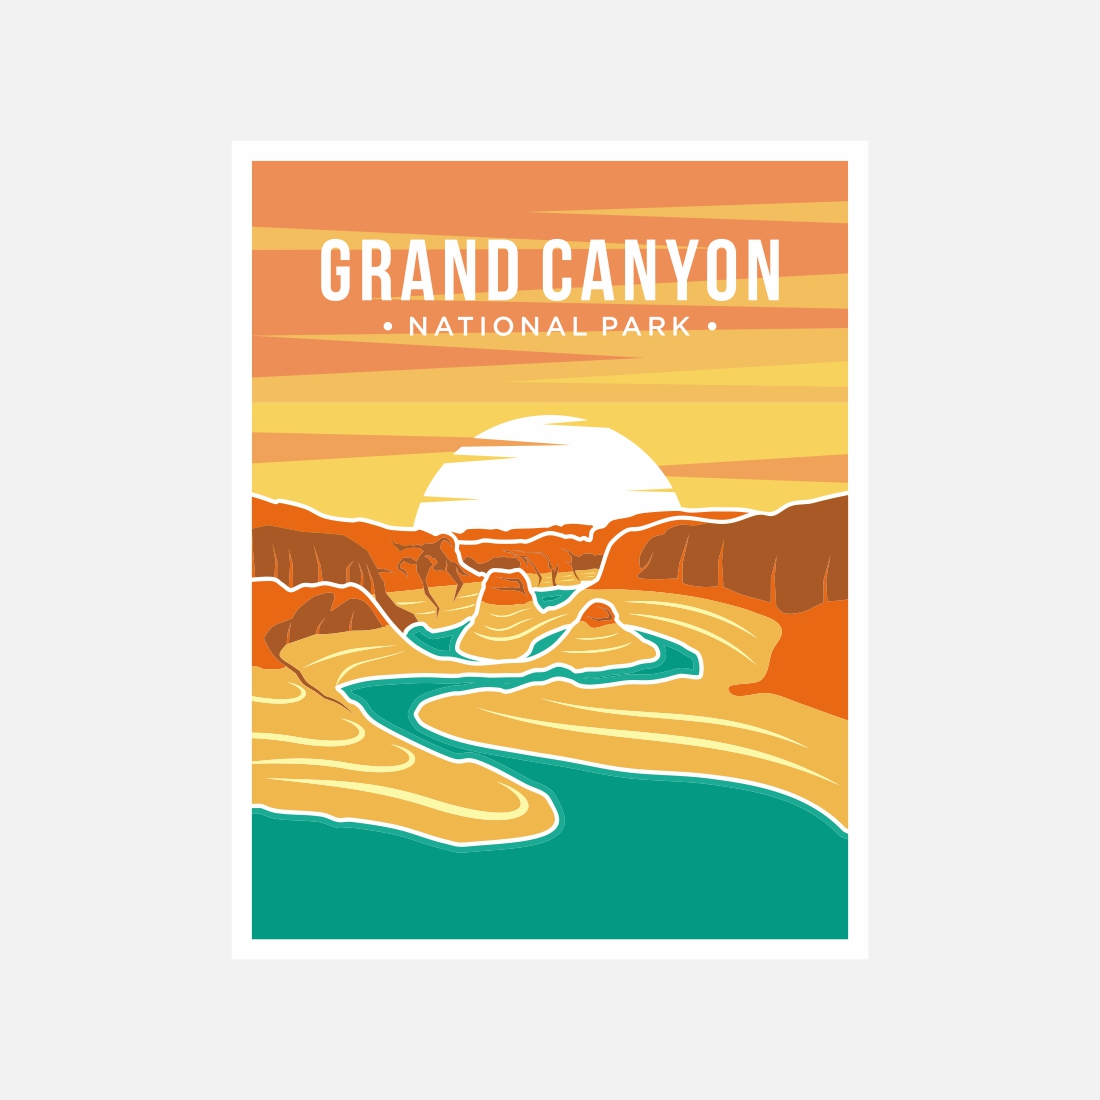 Grand Canyon National Park poster vector illustration design – Only $8 preview image.